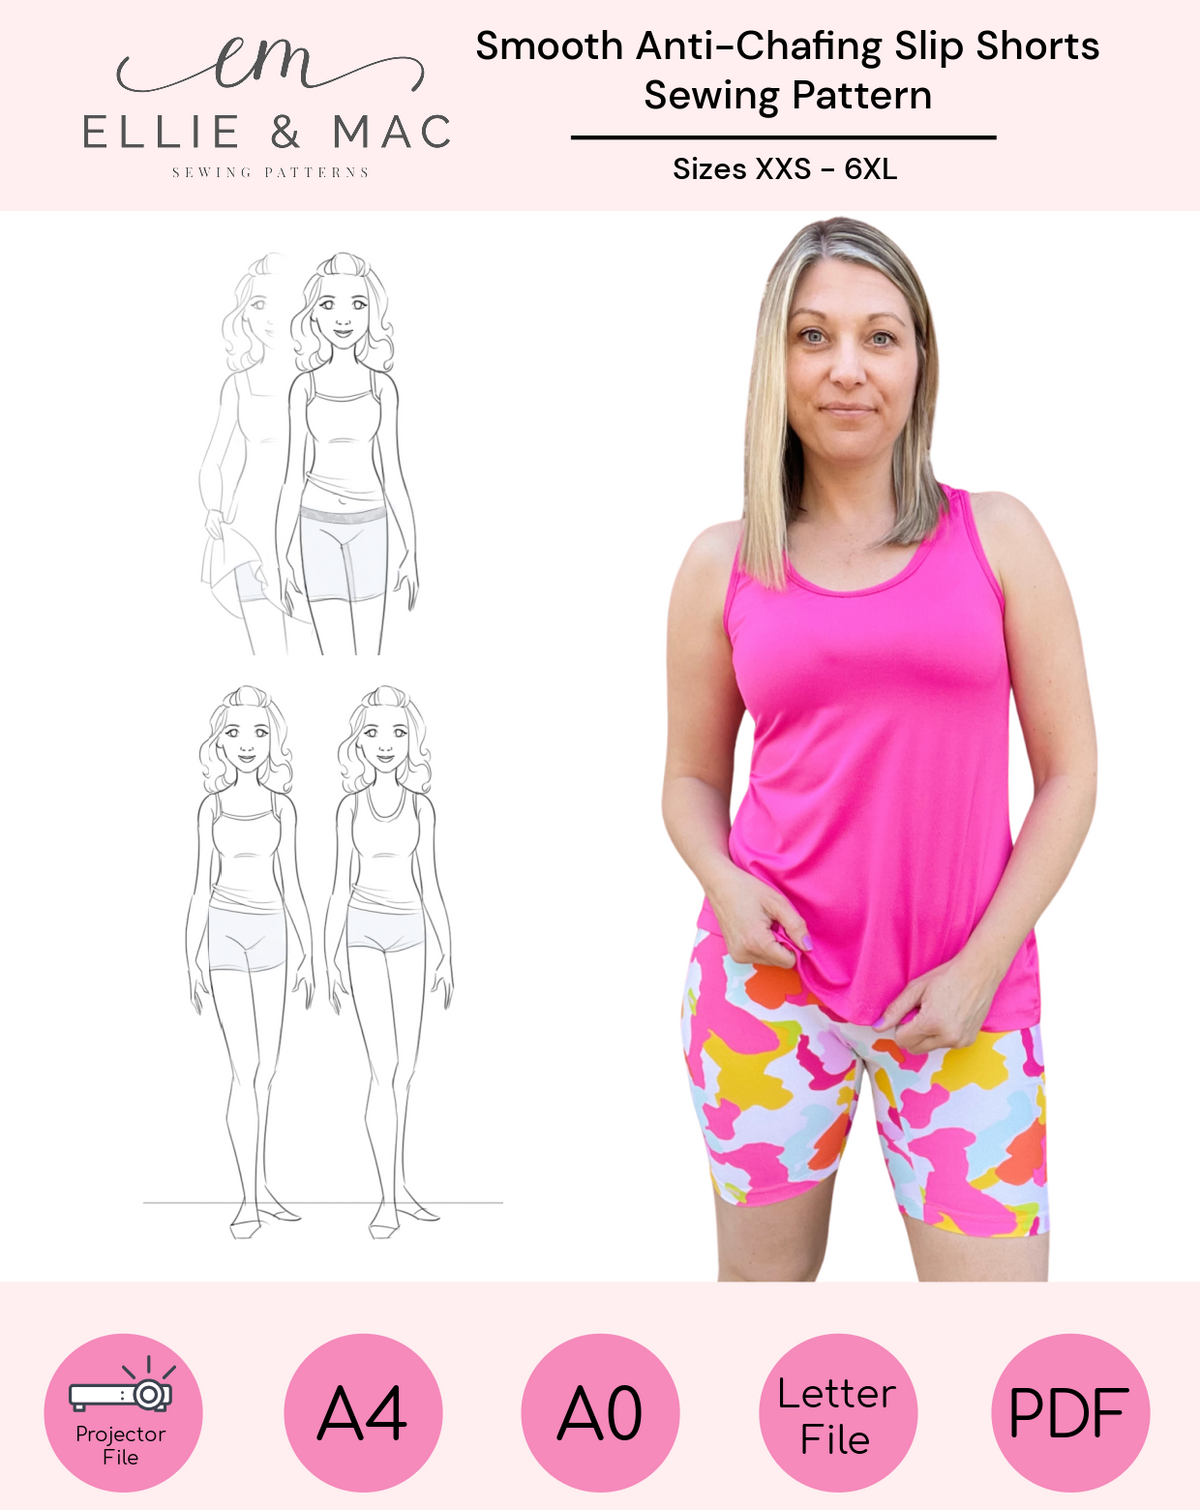 Smooth Anti-Chaffing Slip Shorties sewing pattern for beginners and advanced sewists alike. They feature three length options and low and high rise options. Quick and easy sewing project!